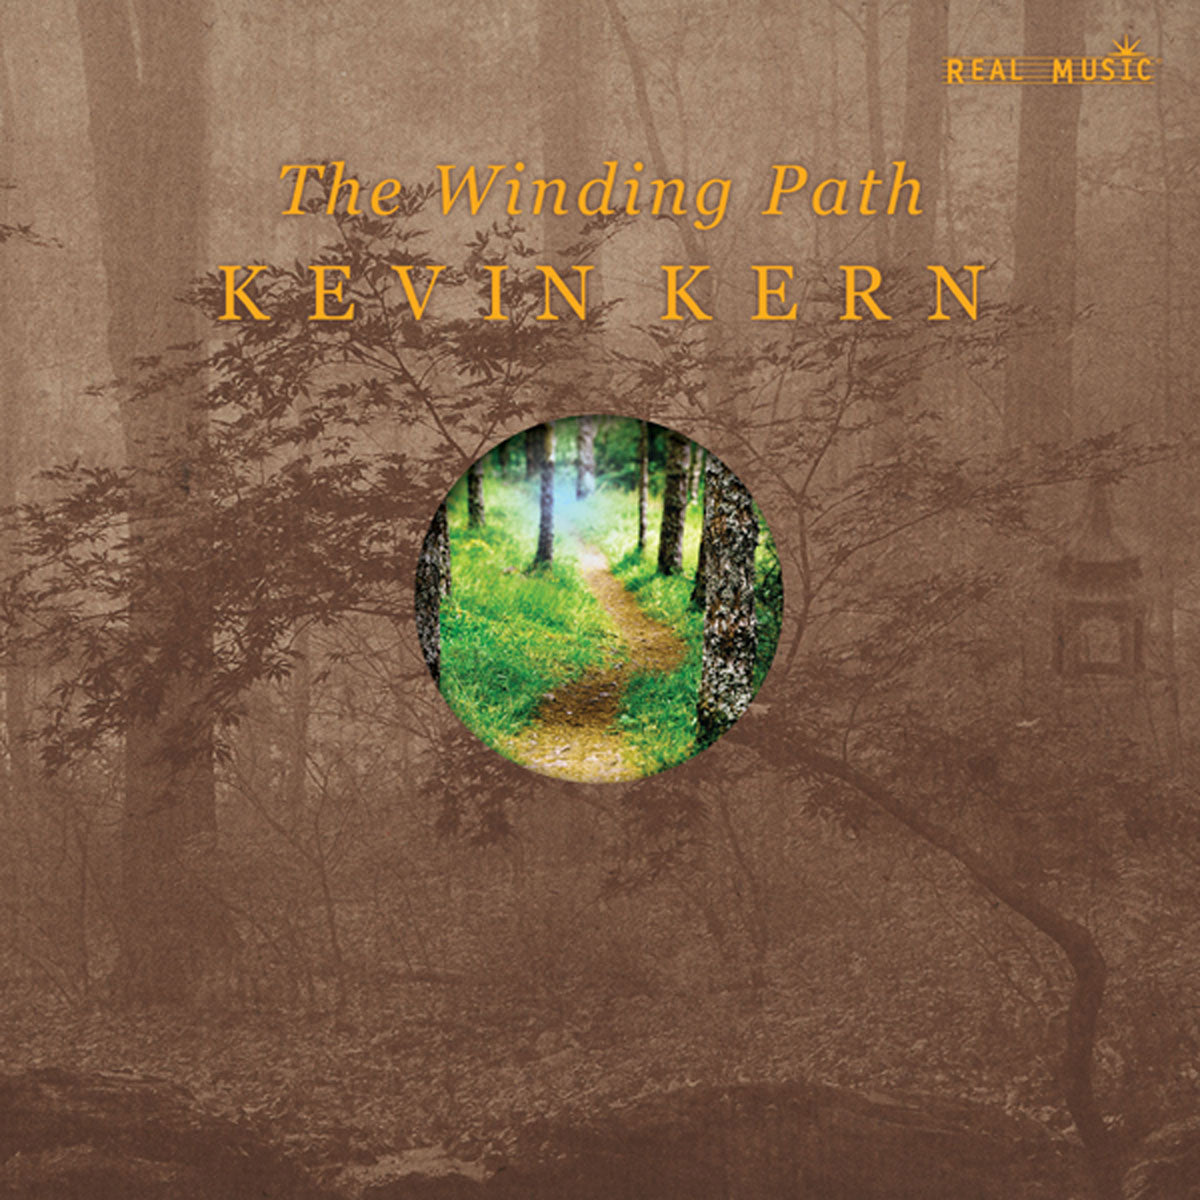 The Winding Path by Kevin Kern, cd cover art.